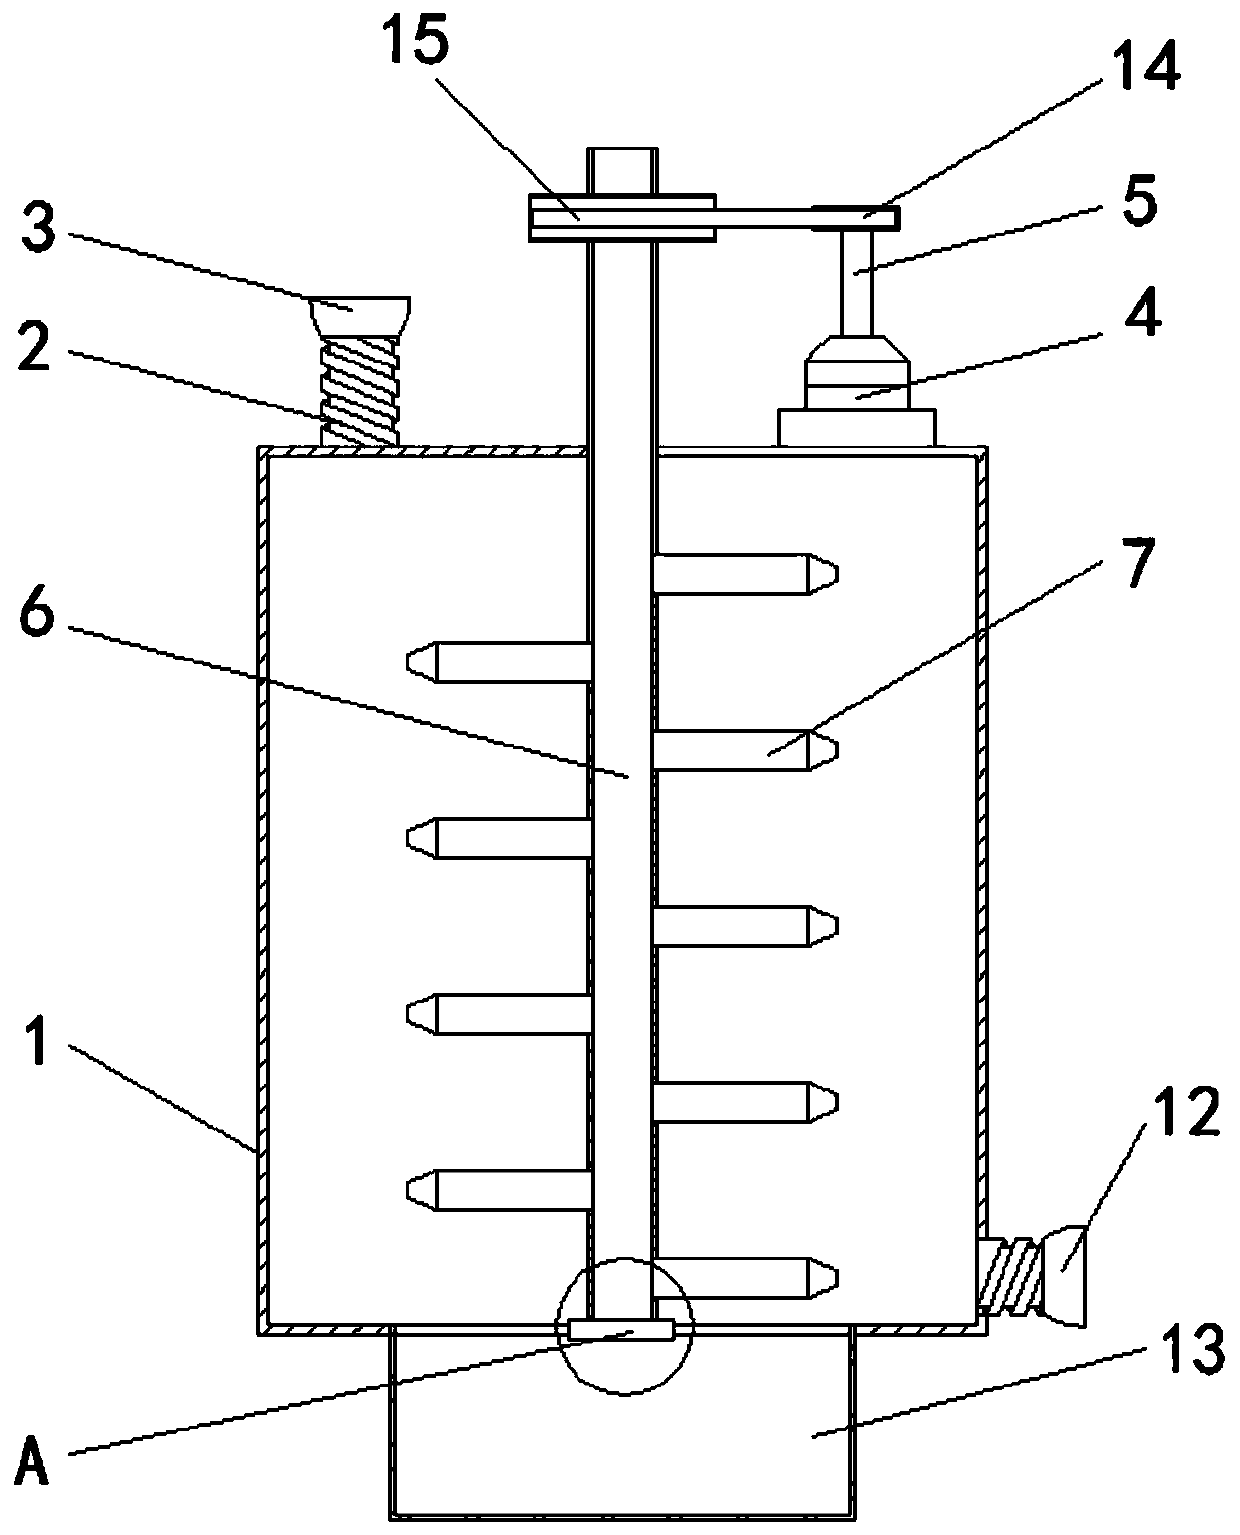 Biological fermentation device convenient to clean and filter